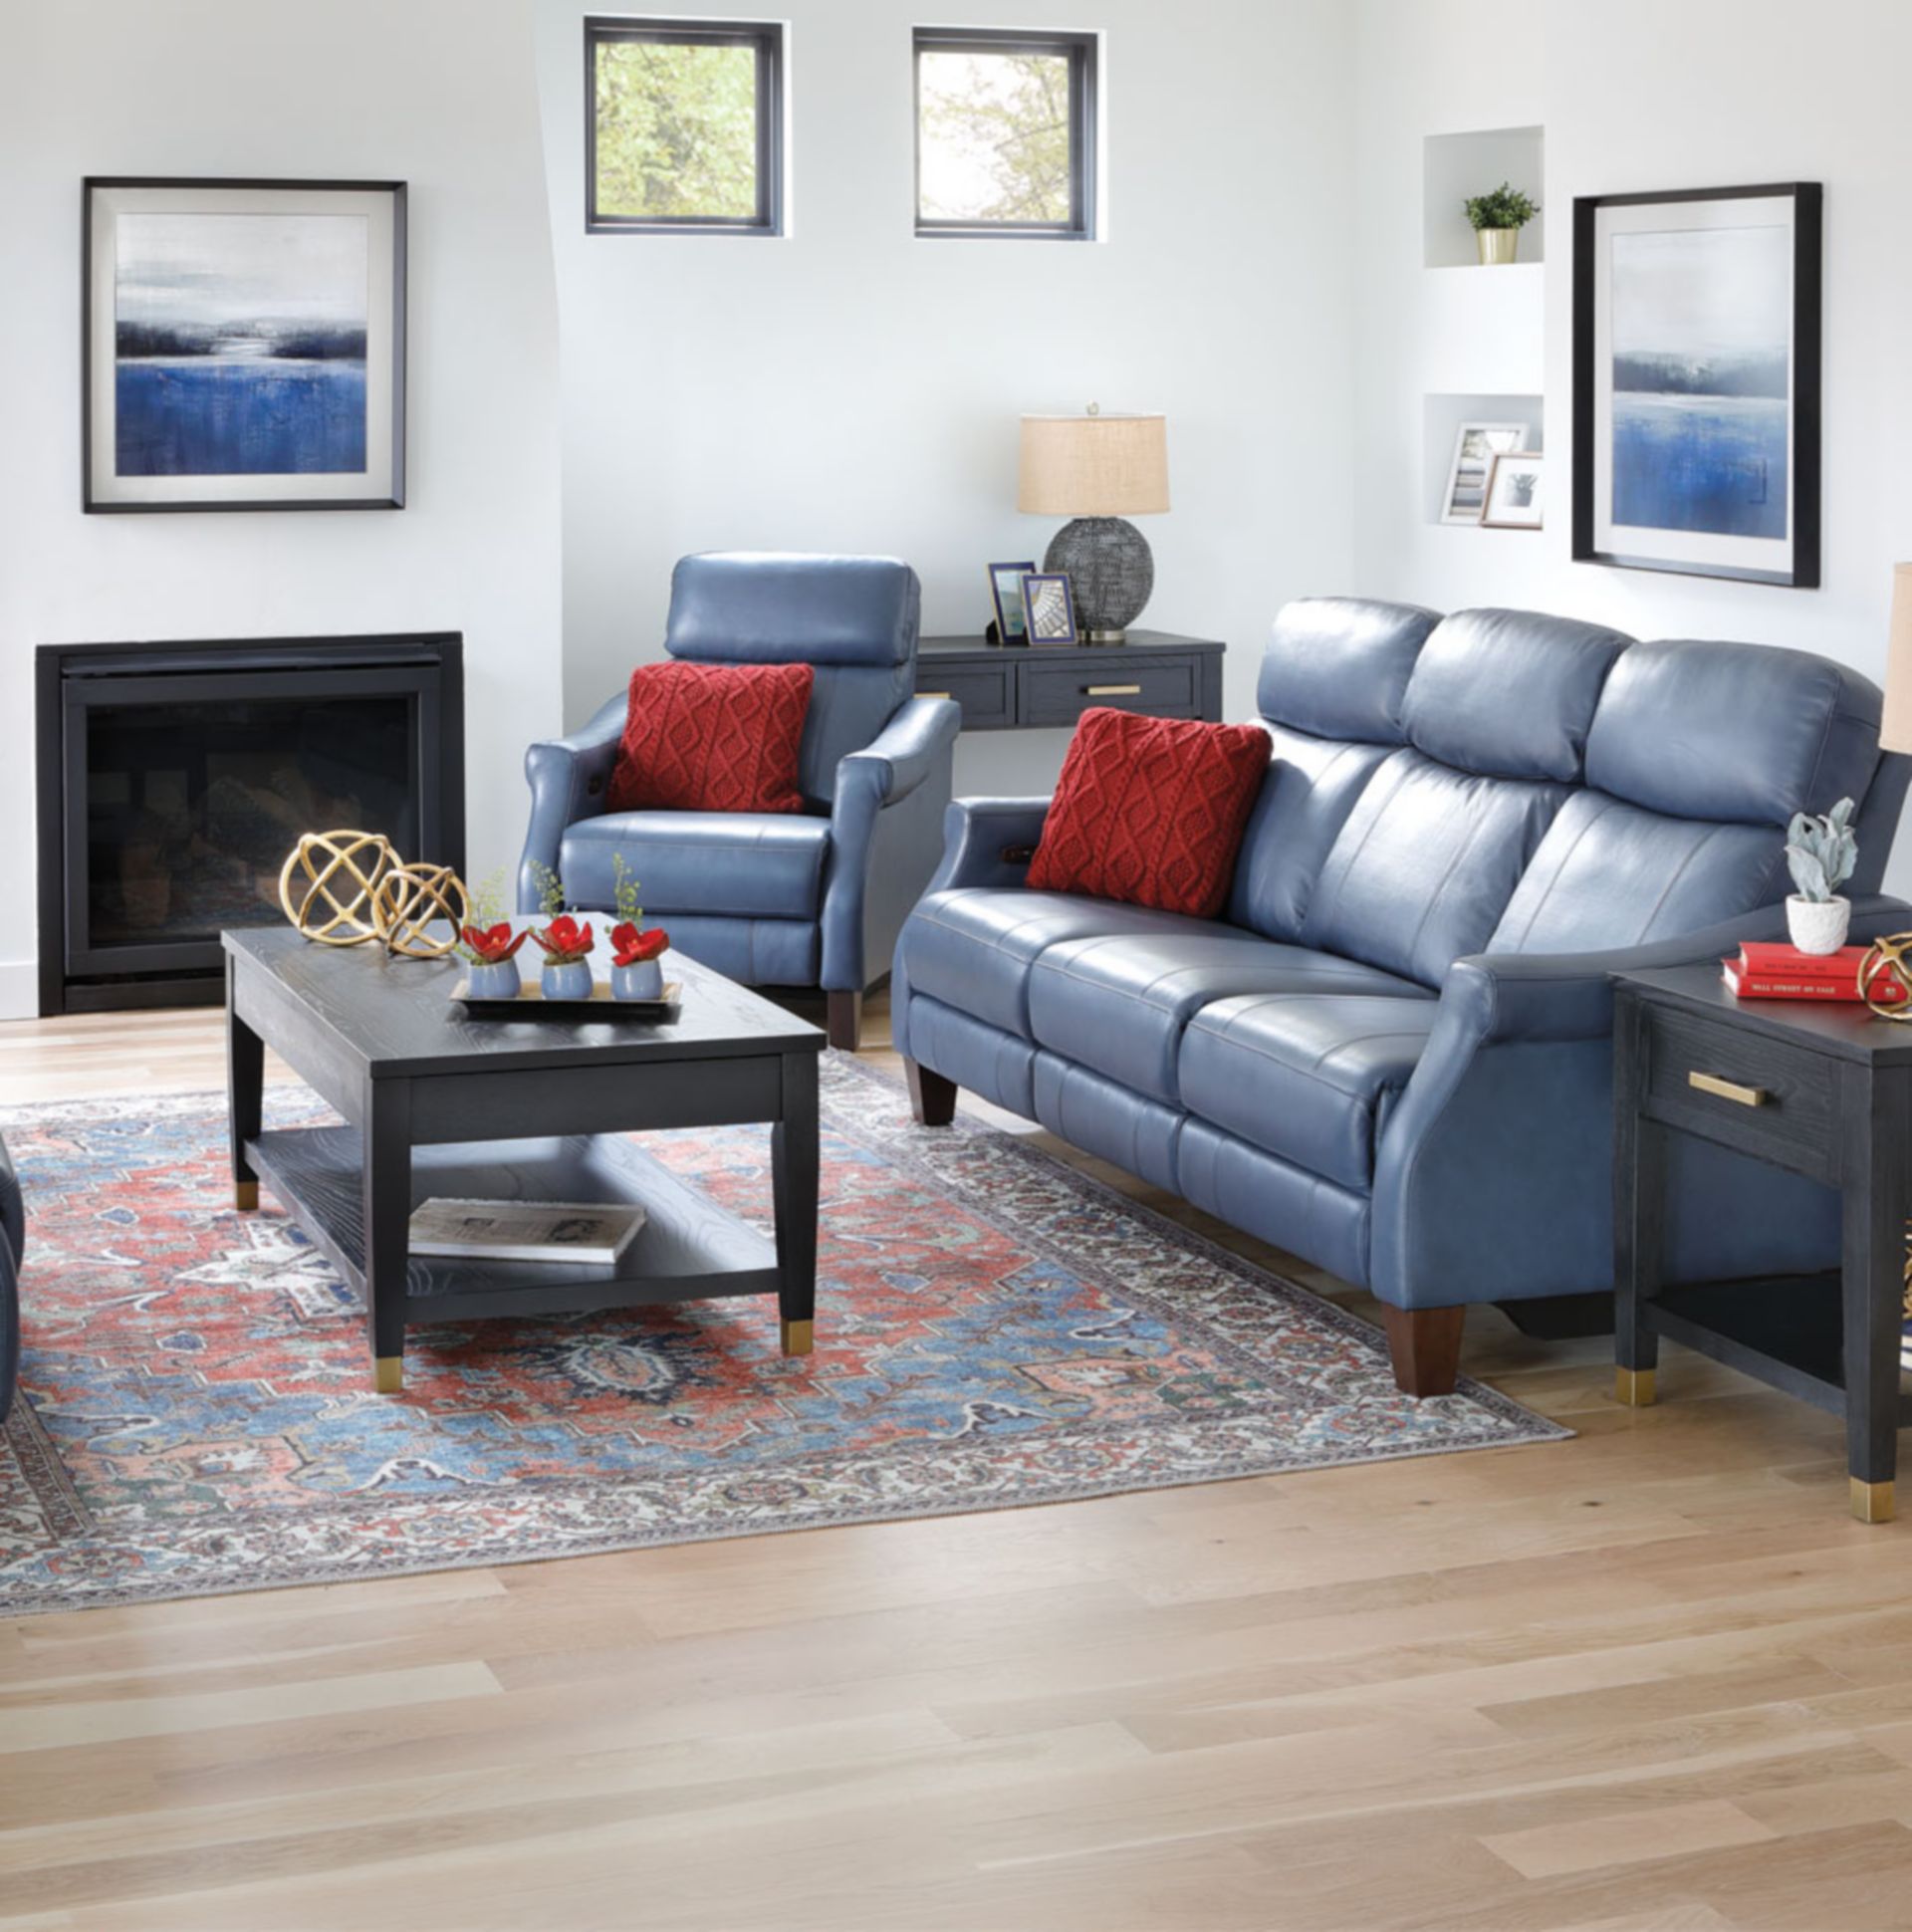 Astra Sofa Group. Blue leather Sofa, Love seat, and chair in home.